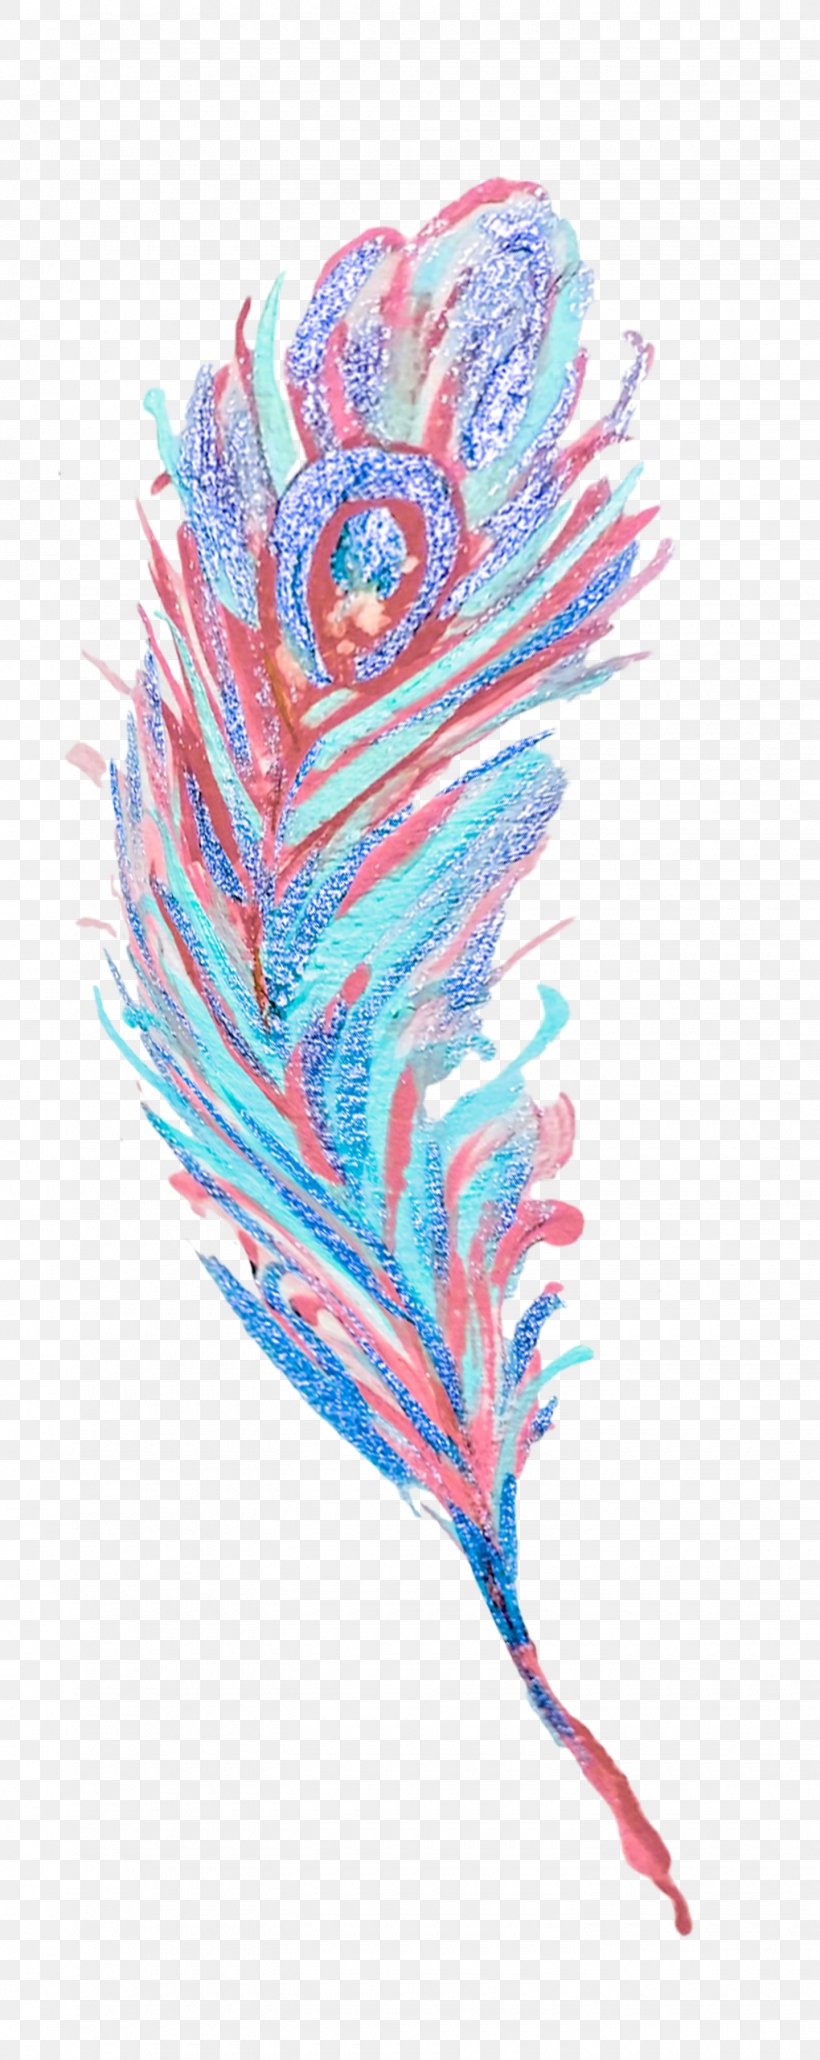 Feather Graphic Design Watercolor Painting, PNG, 1440x3618px, Feather, Art, Color, Designer, Dreamcatcher Download Free